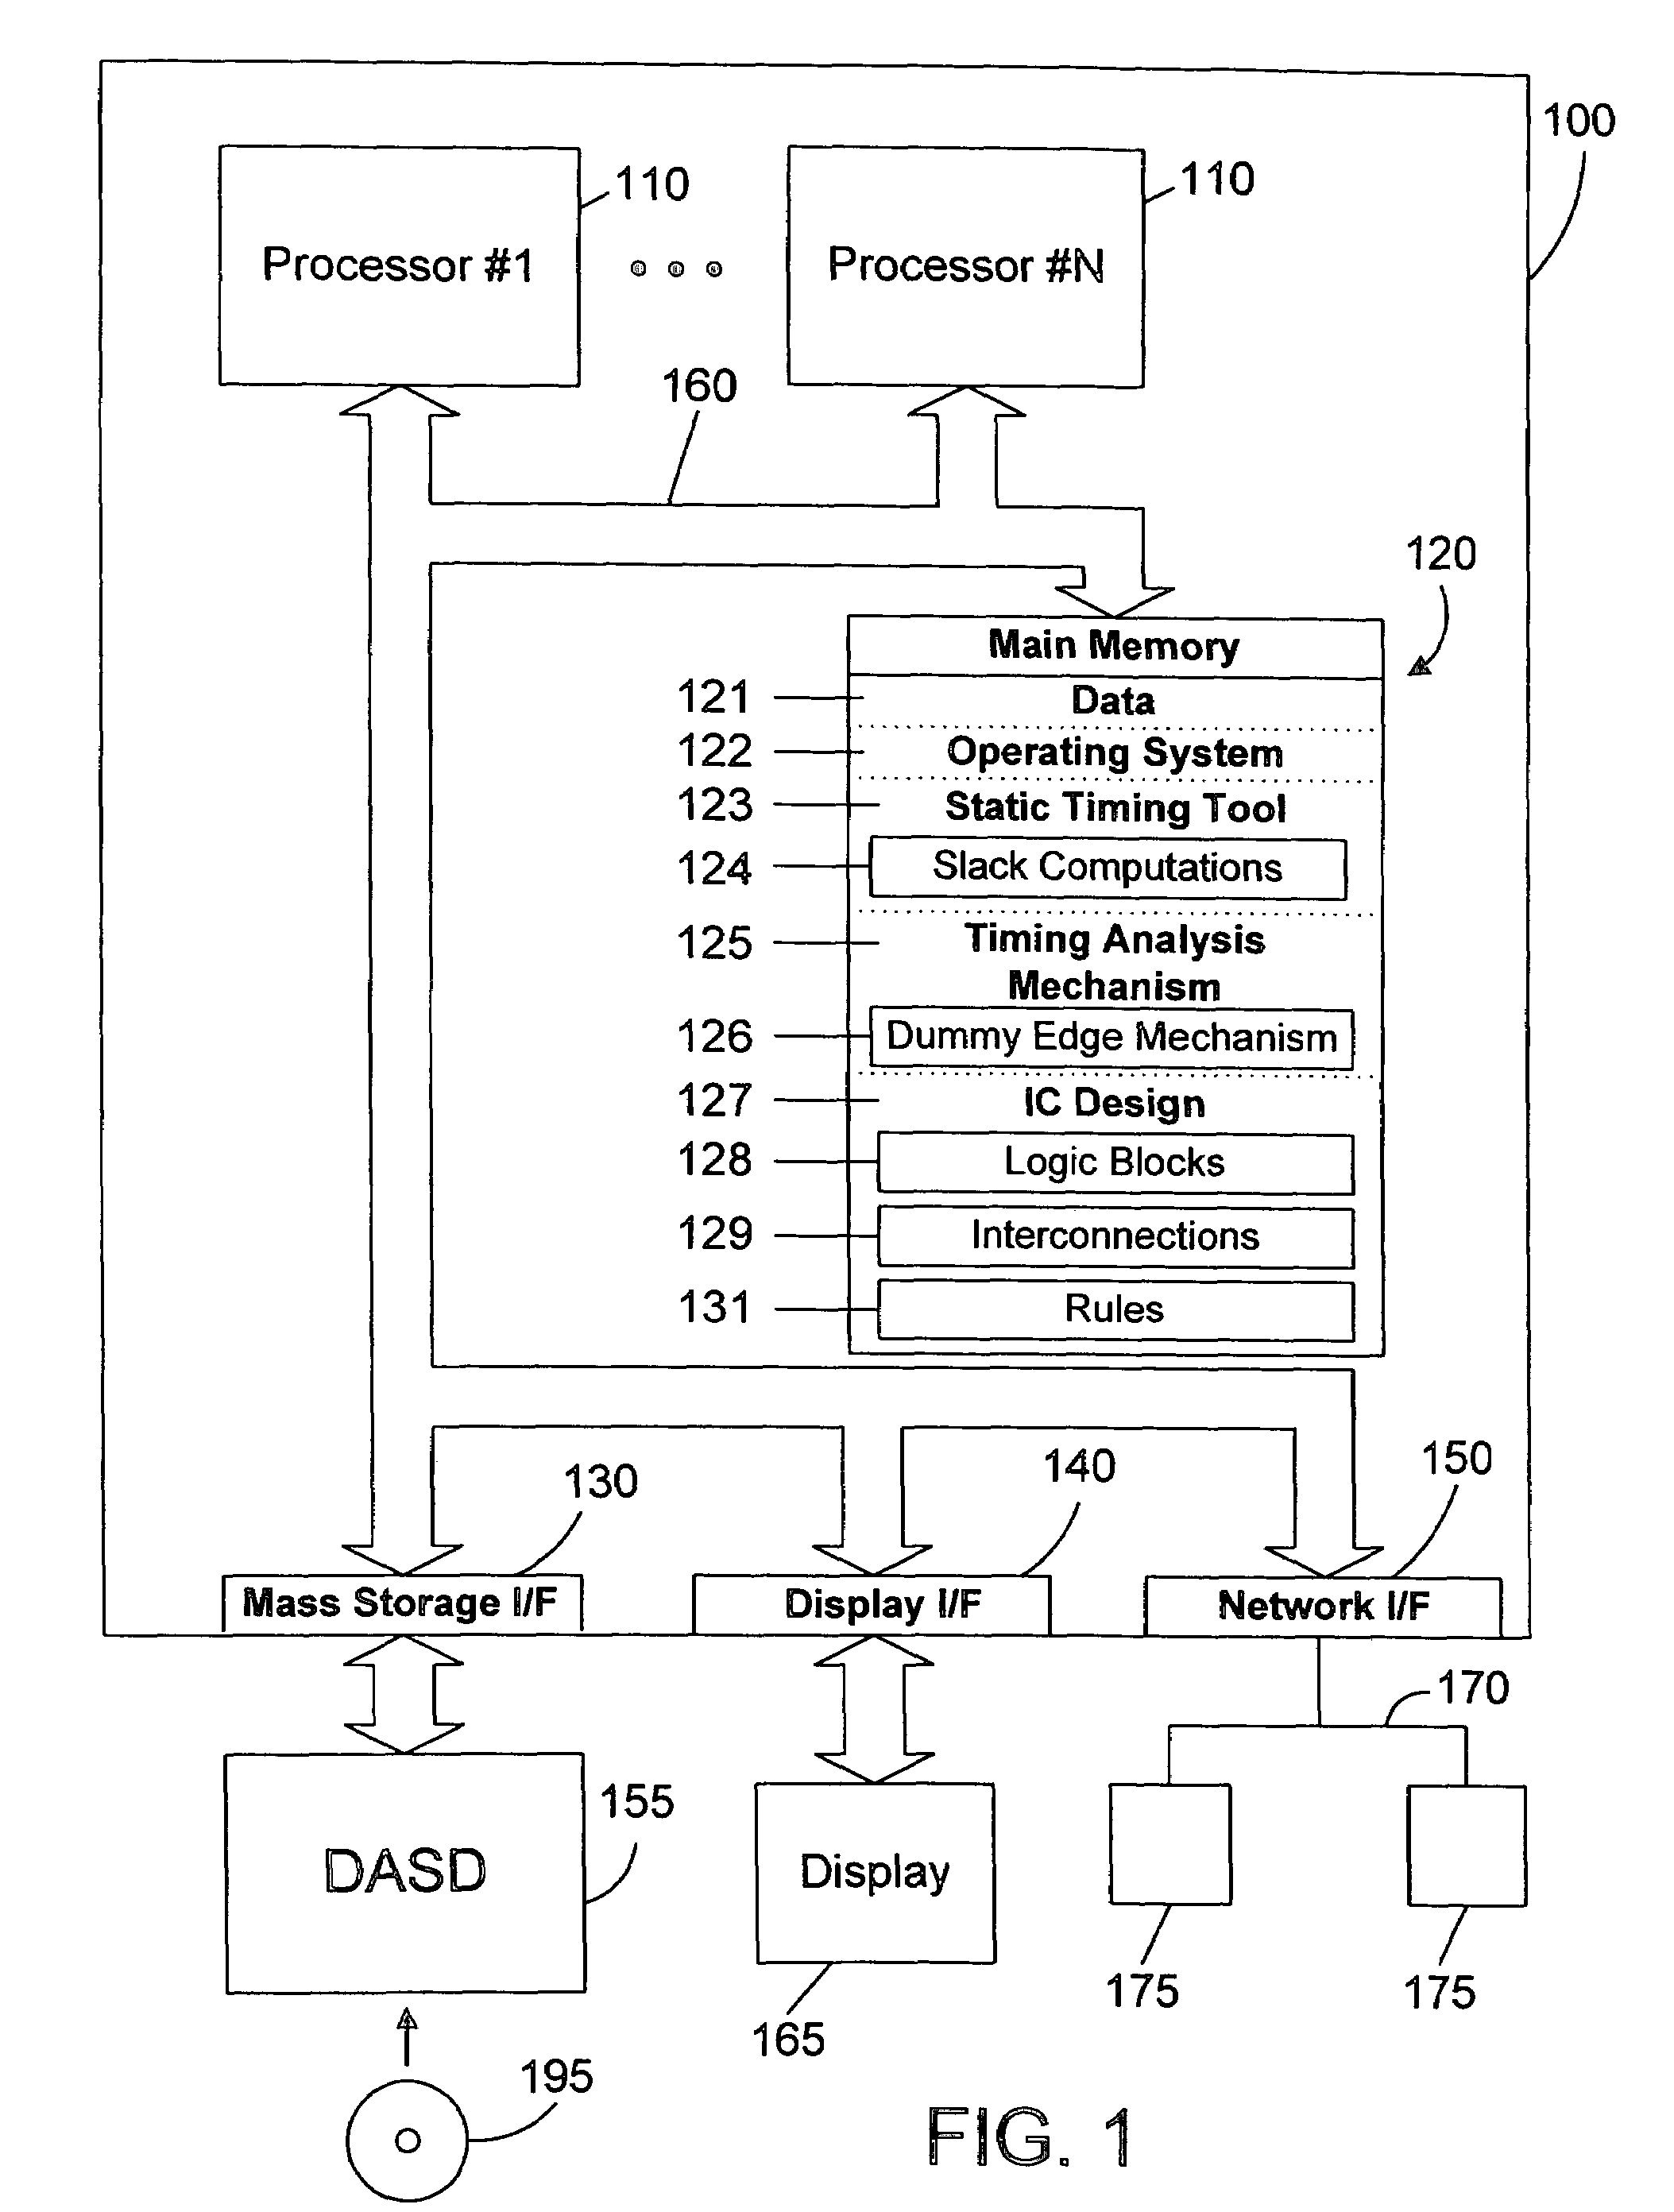 Apparatus and method for performing static timing analysis of an integrated circuit design using dummy edge modeling